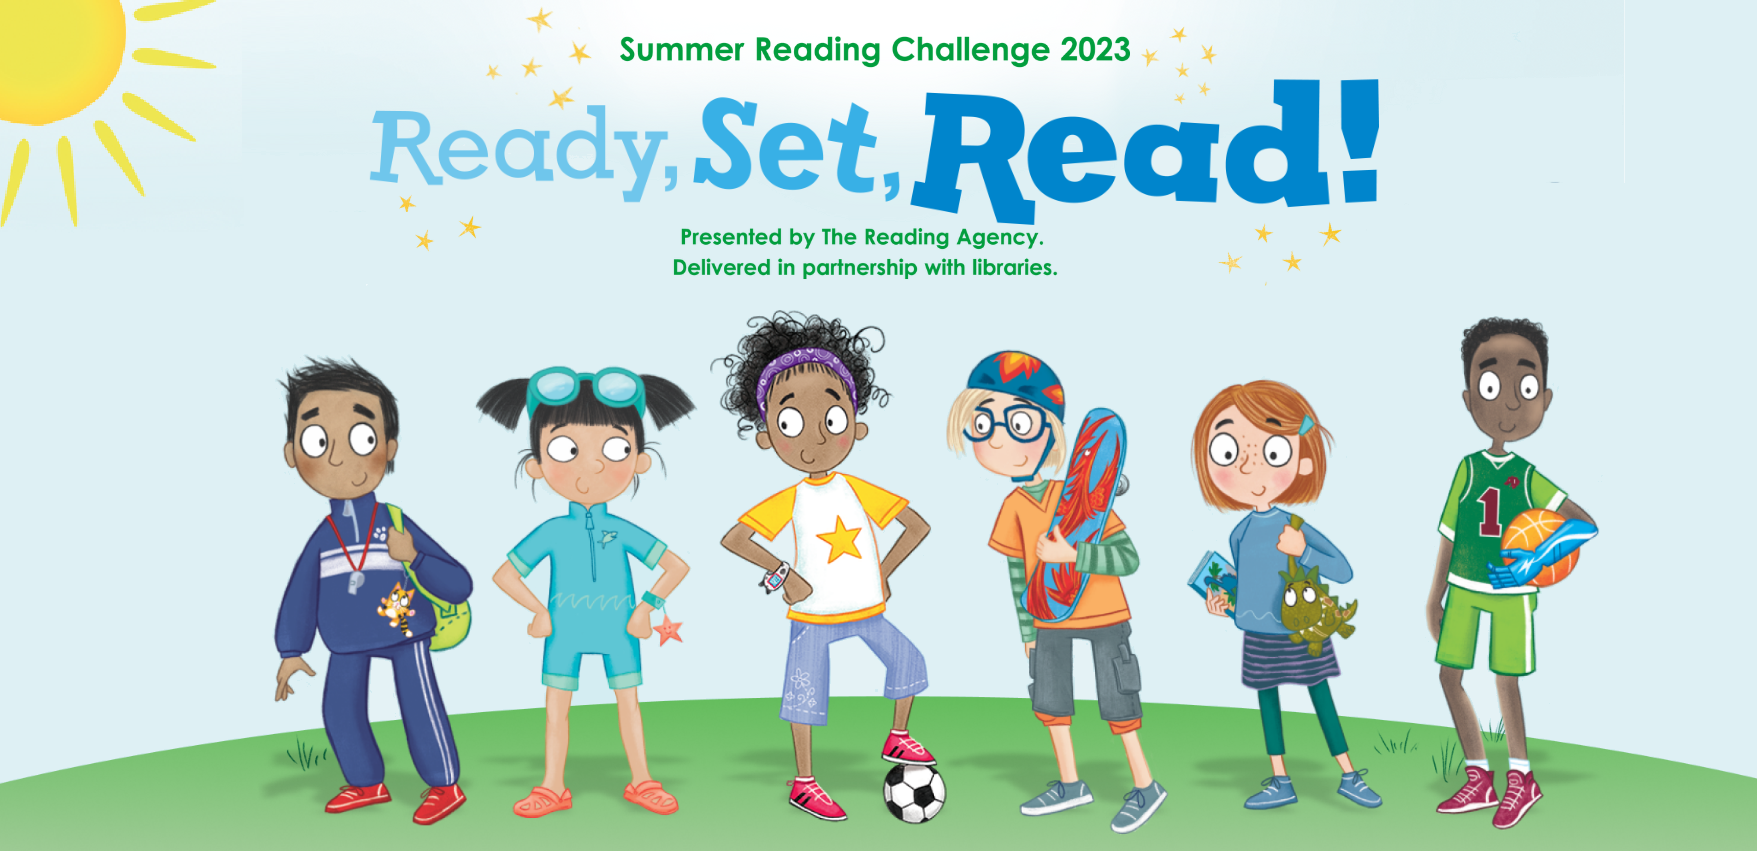 Ready Set Read! Summer Reading Challenge and the 6 characters